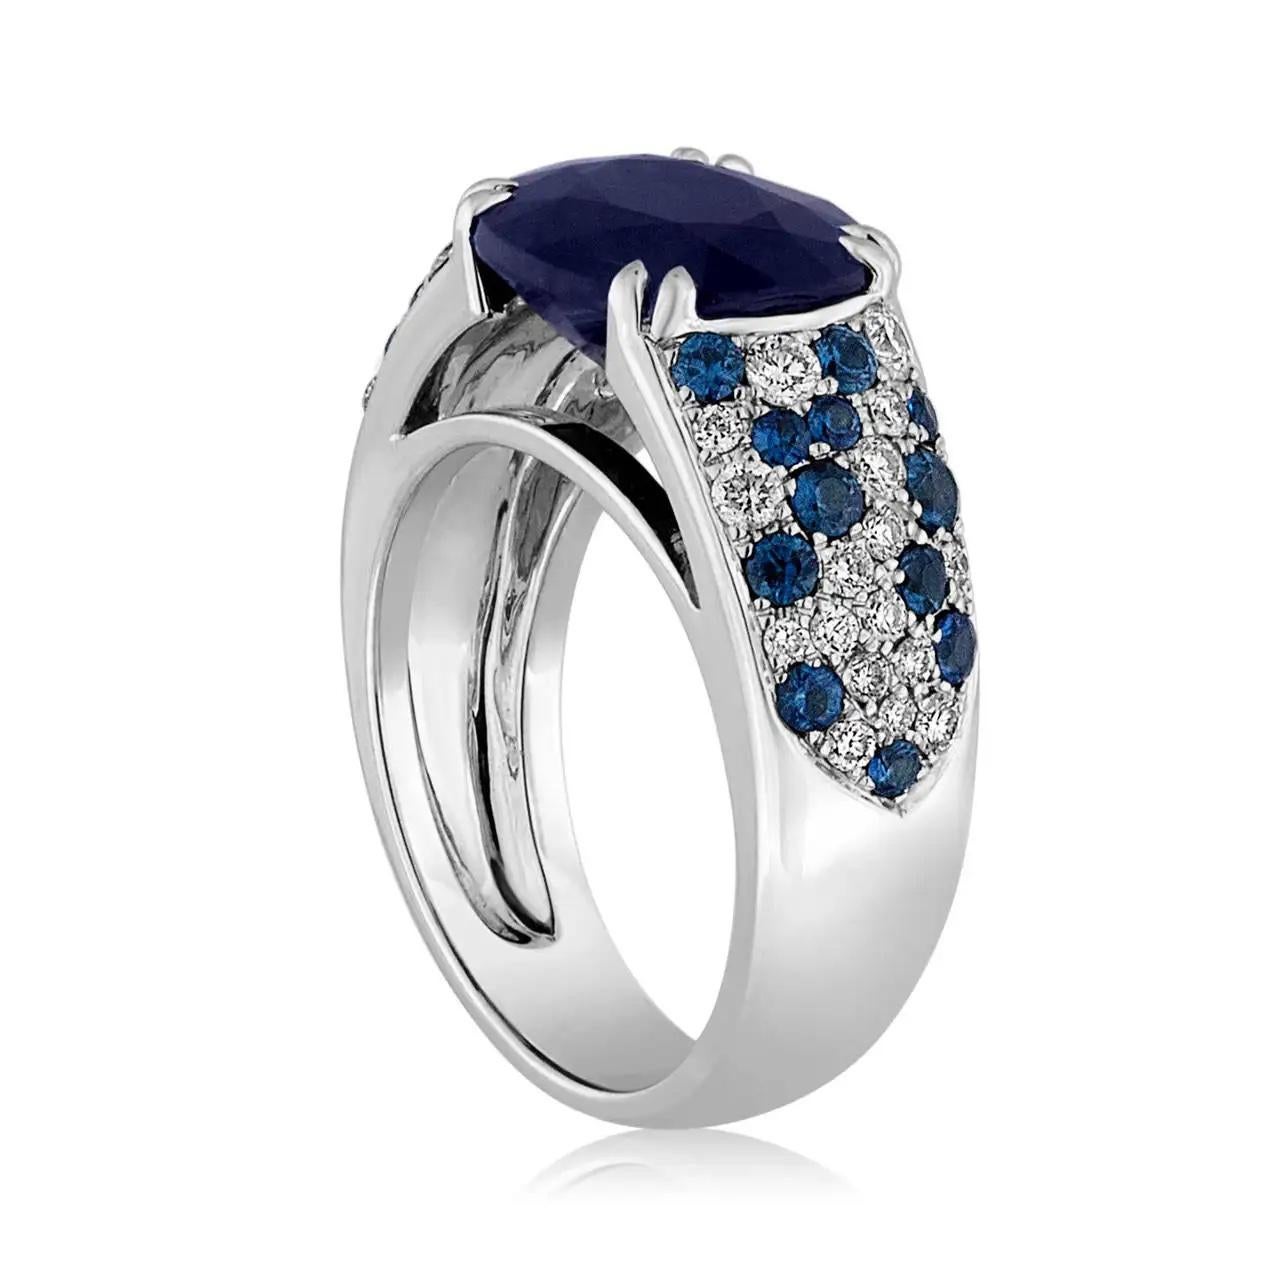 A Mauboussin sapphire and diamond ring from the 'Nuit d'Amour' collection crafted in 18k white gold. The ring features a large oval cut Australian sapphire gemstone that is set east / west and weighs an approximate 4.20 ct. The band of the ring is